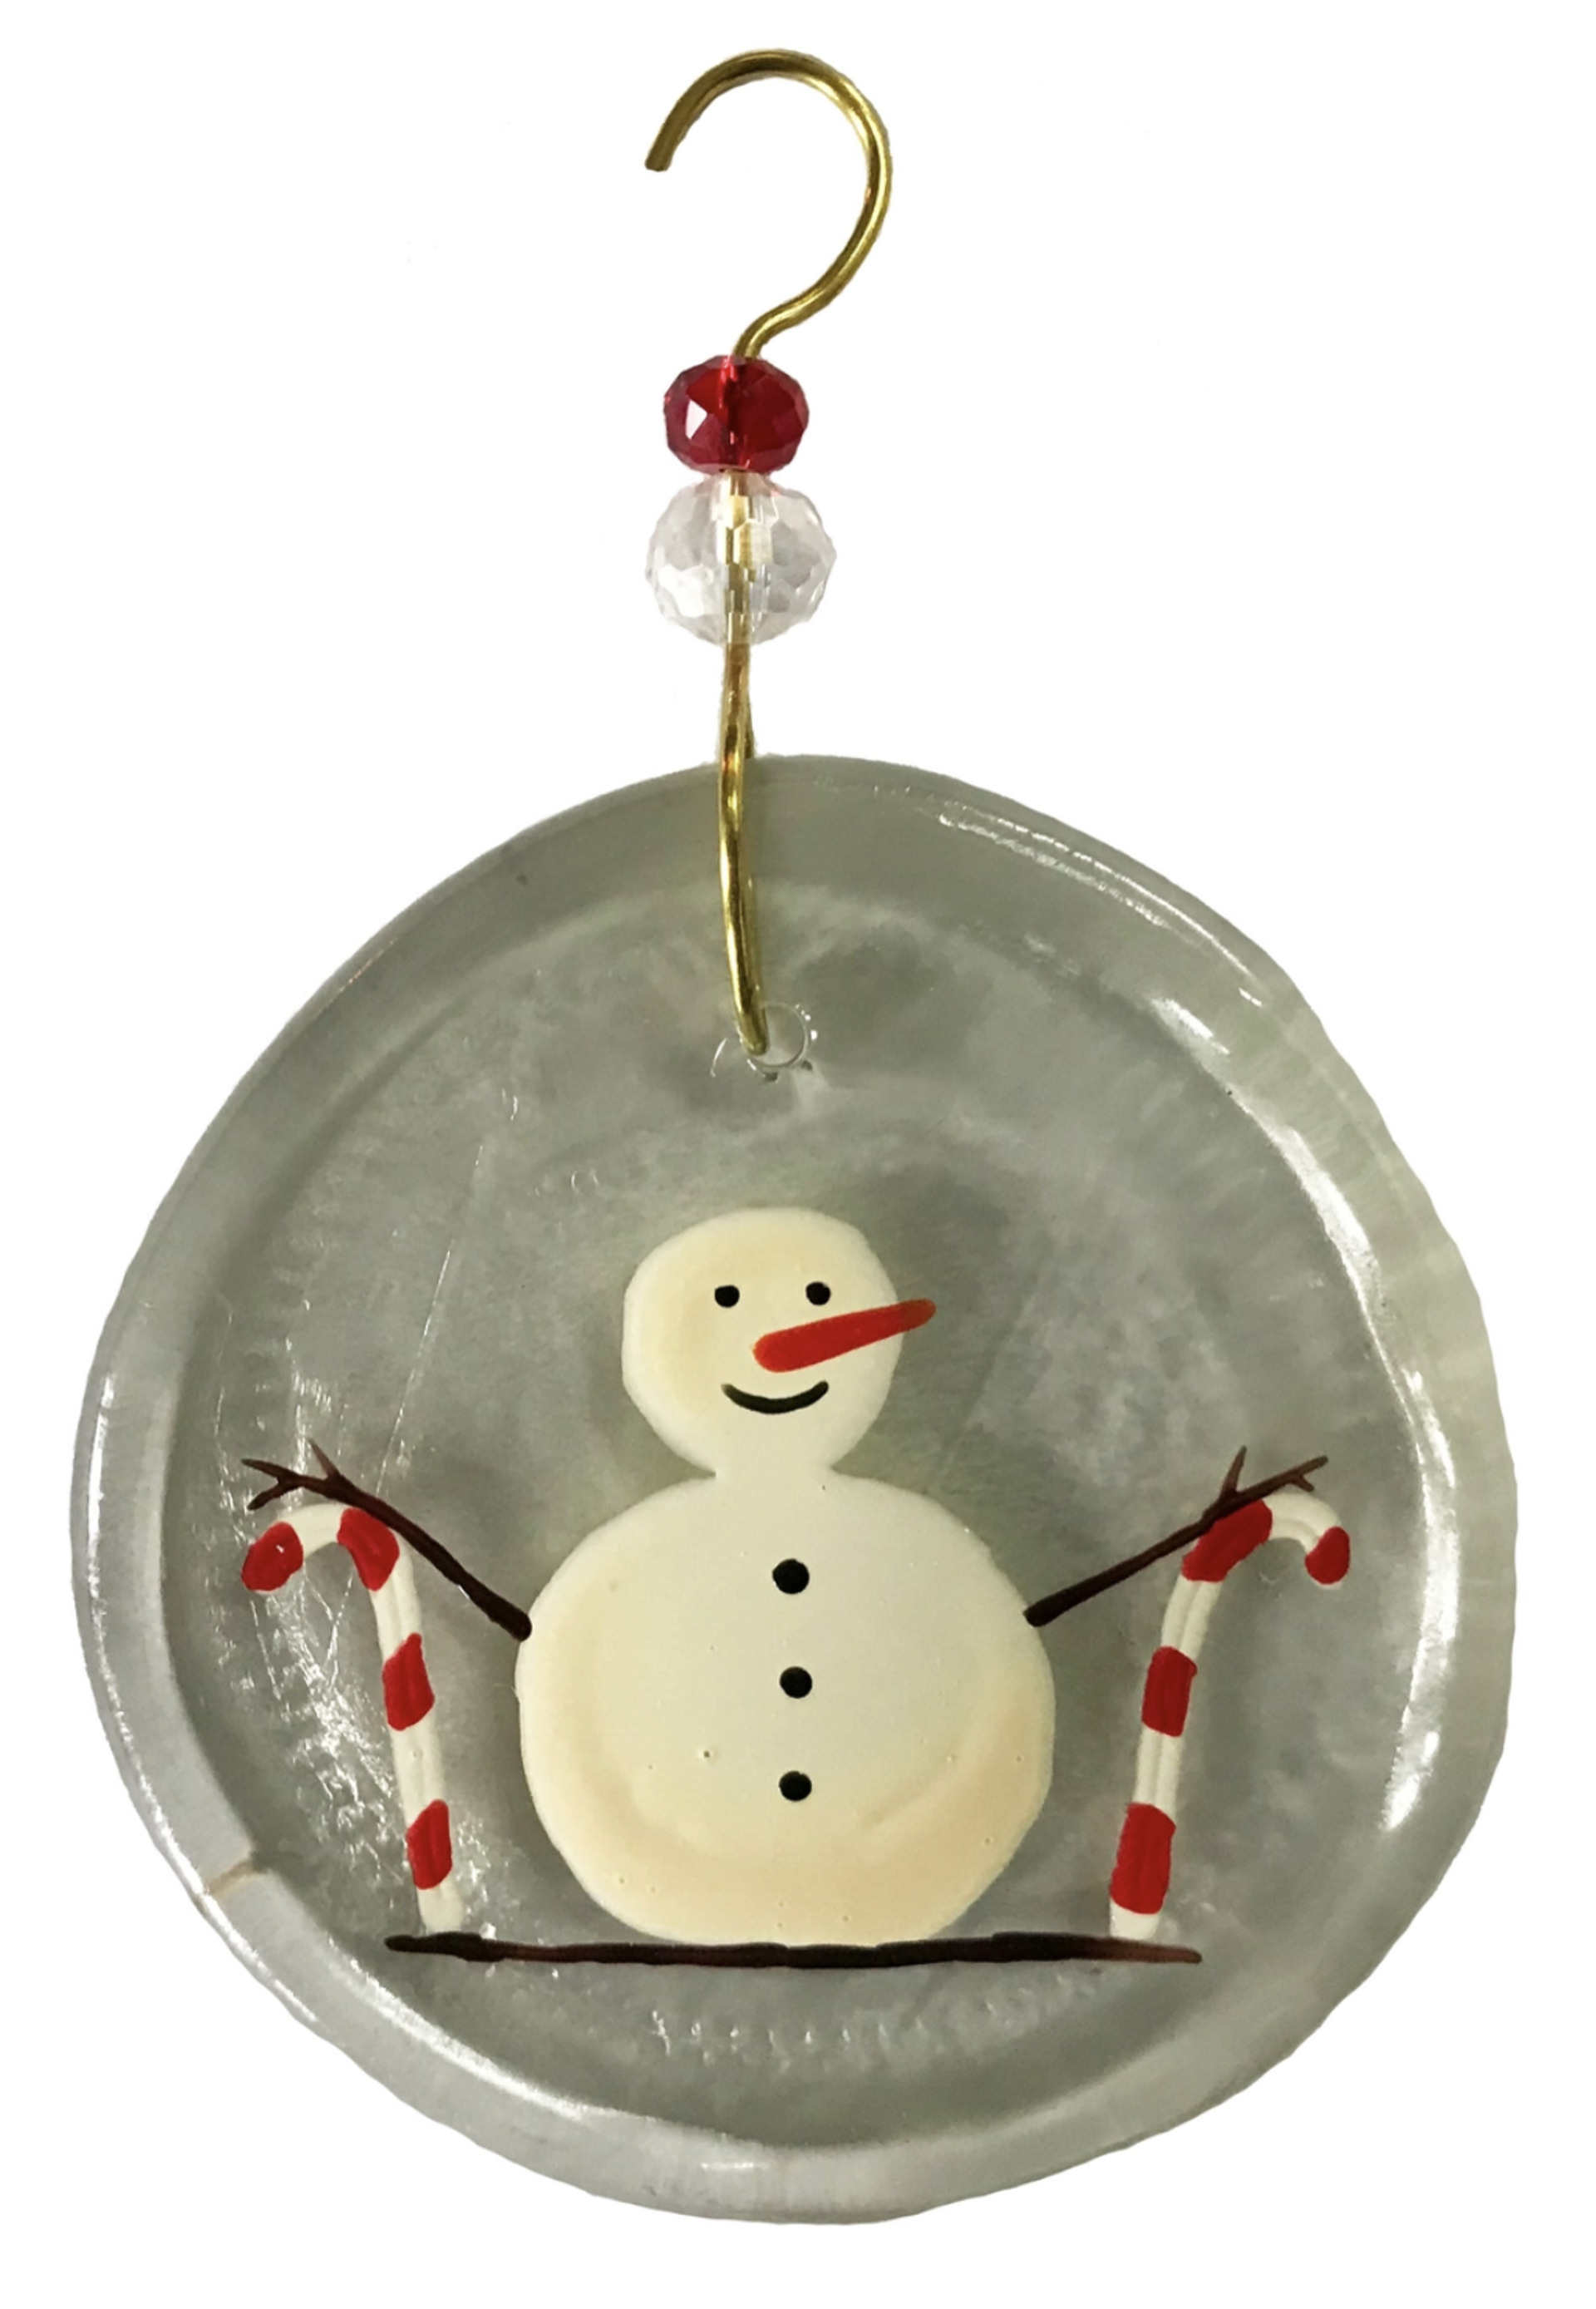 Ornament - Snowman & Candy Canes by Wine Bottle Art